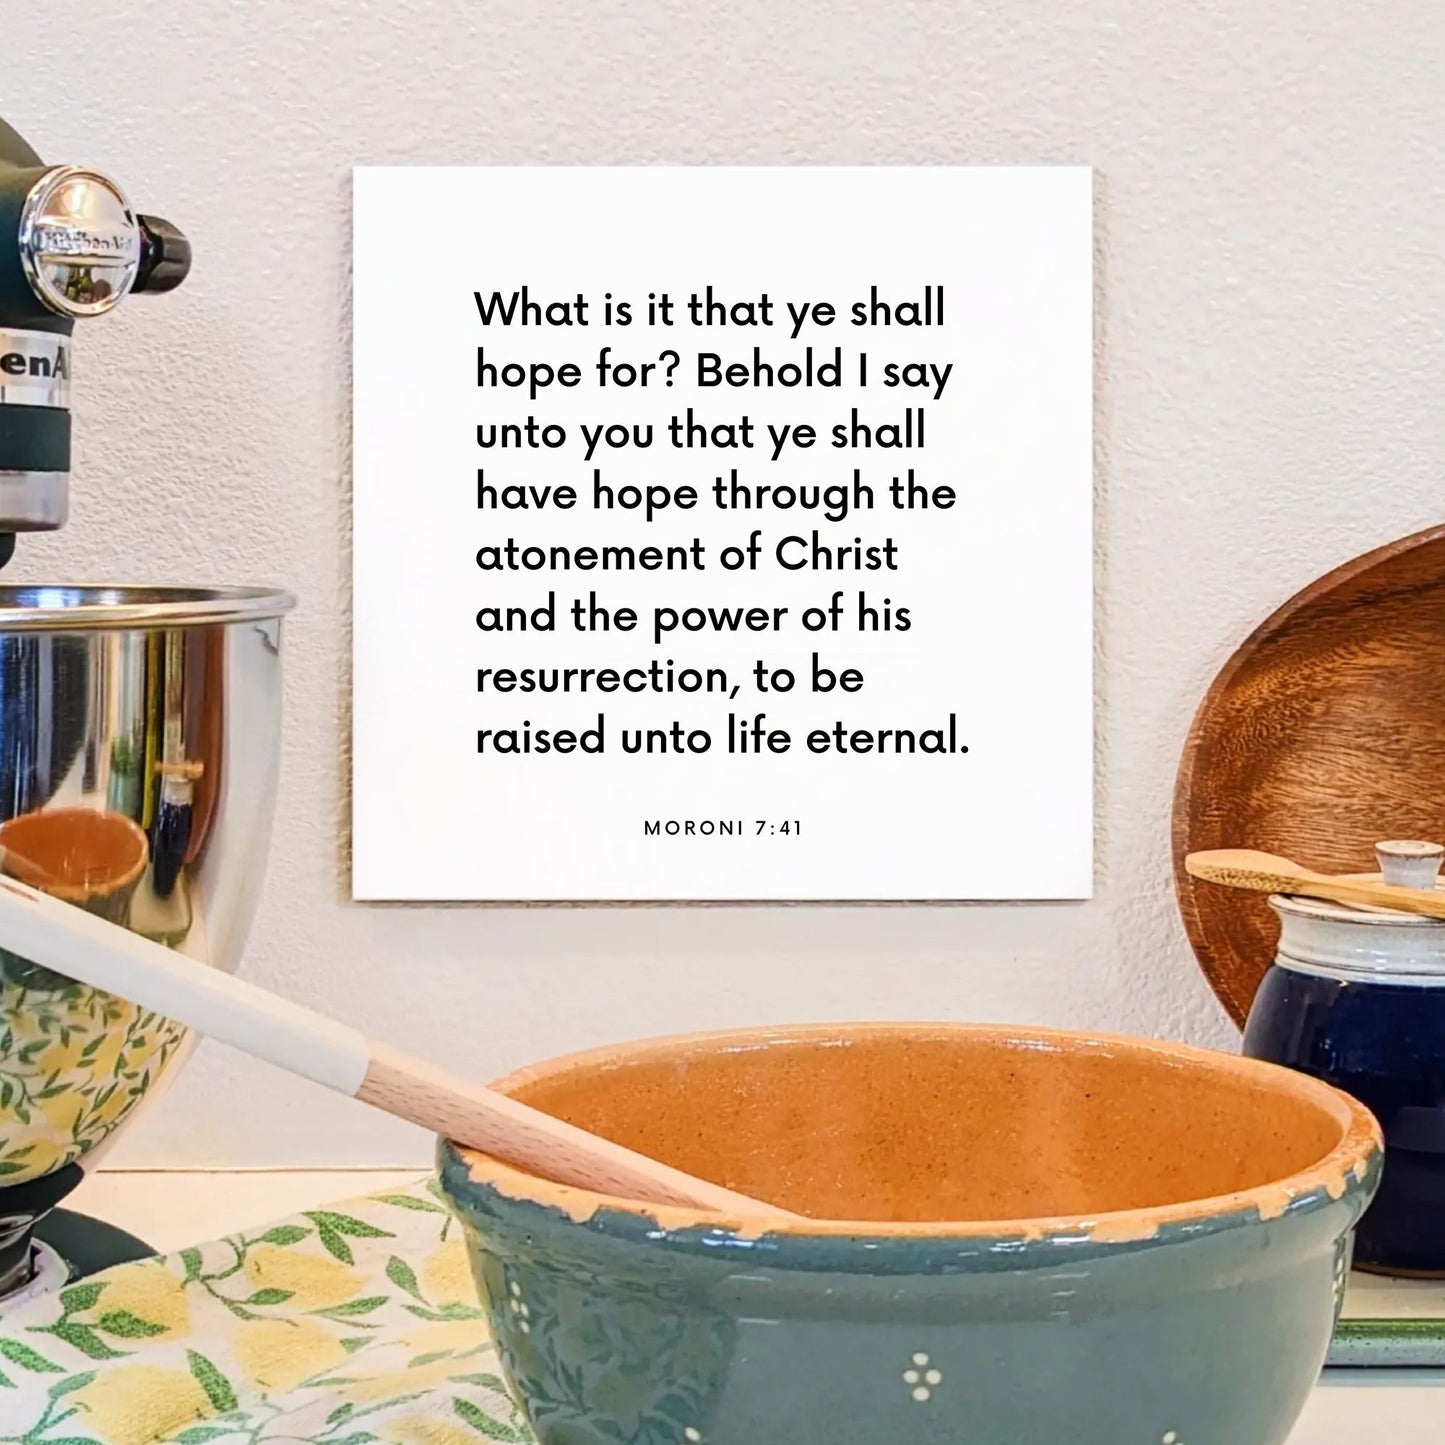 Kitchen mouting of the scripture tile for Moroni 7:41 - "Ye shall have hope through the atonement of Christ"